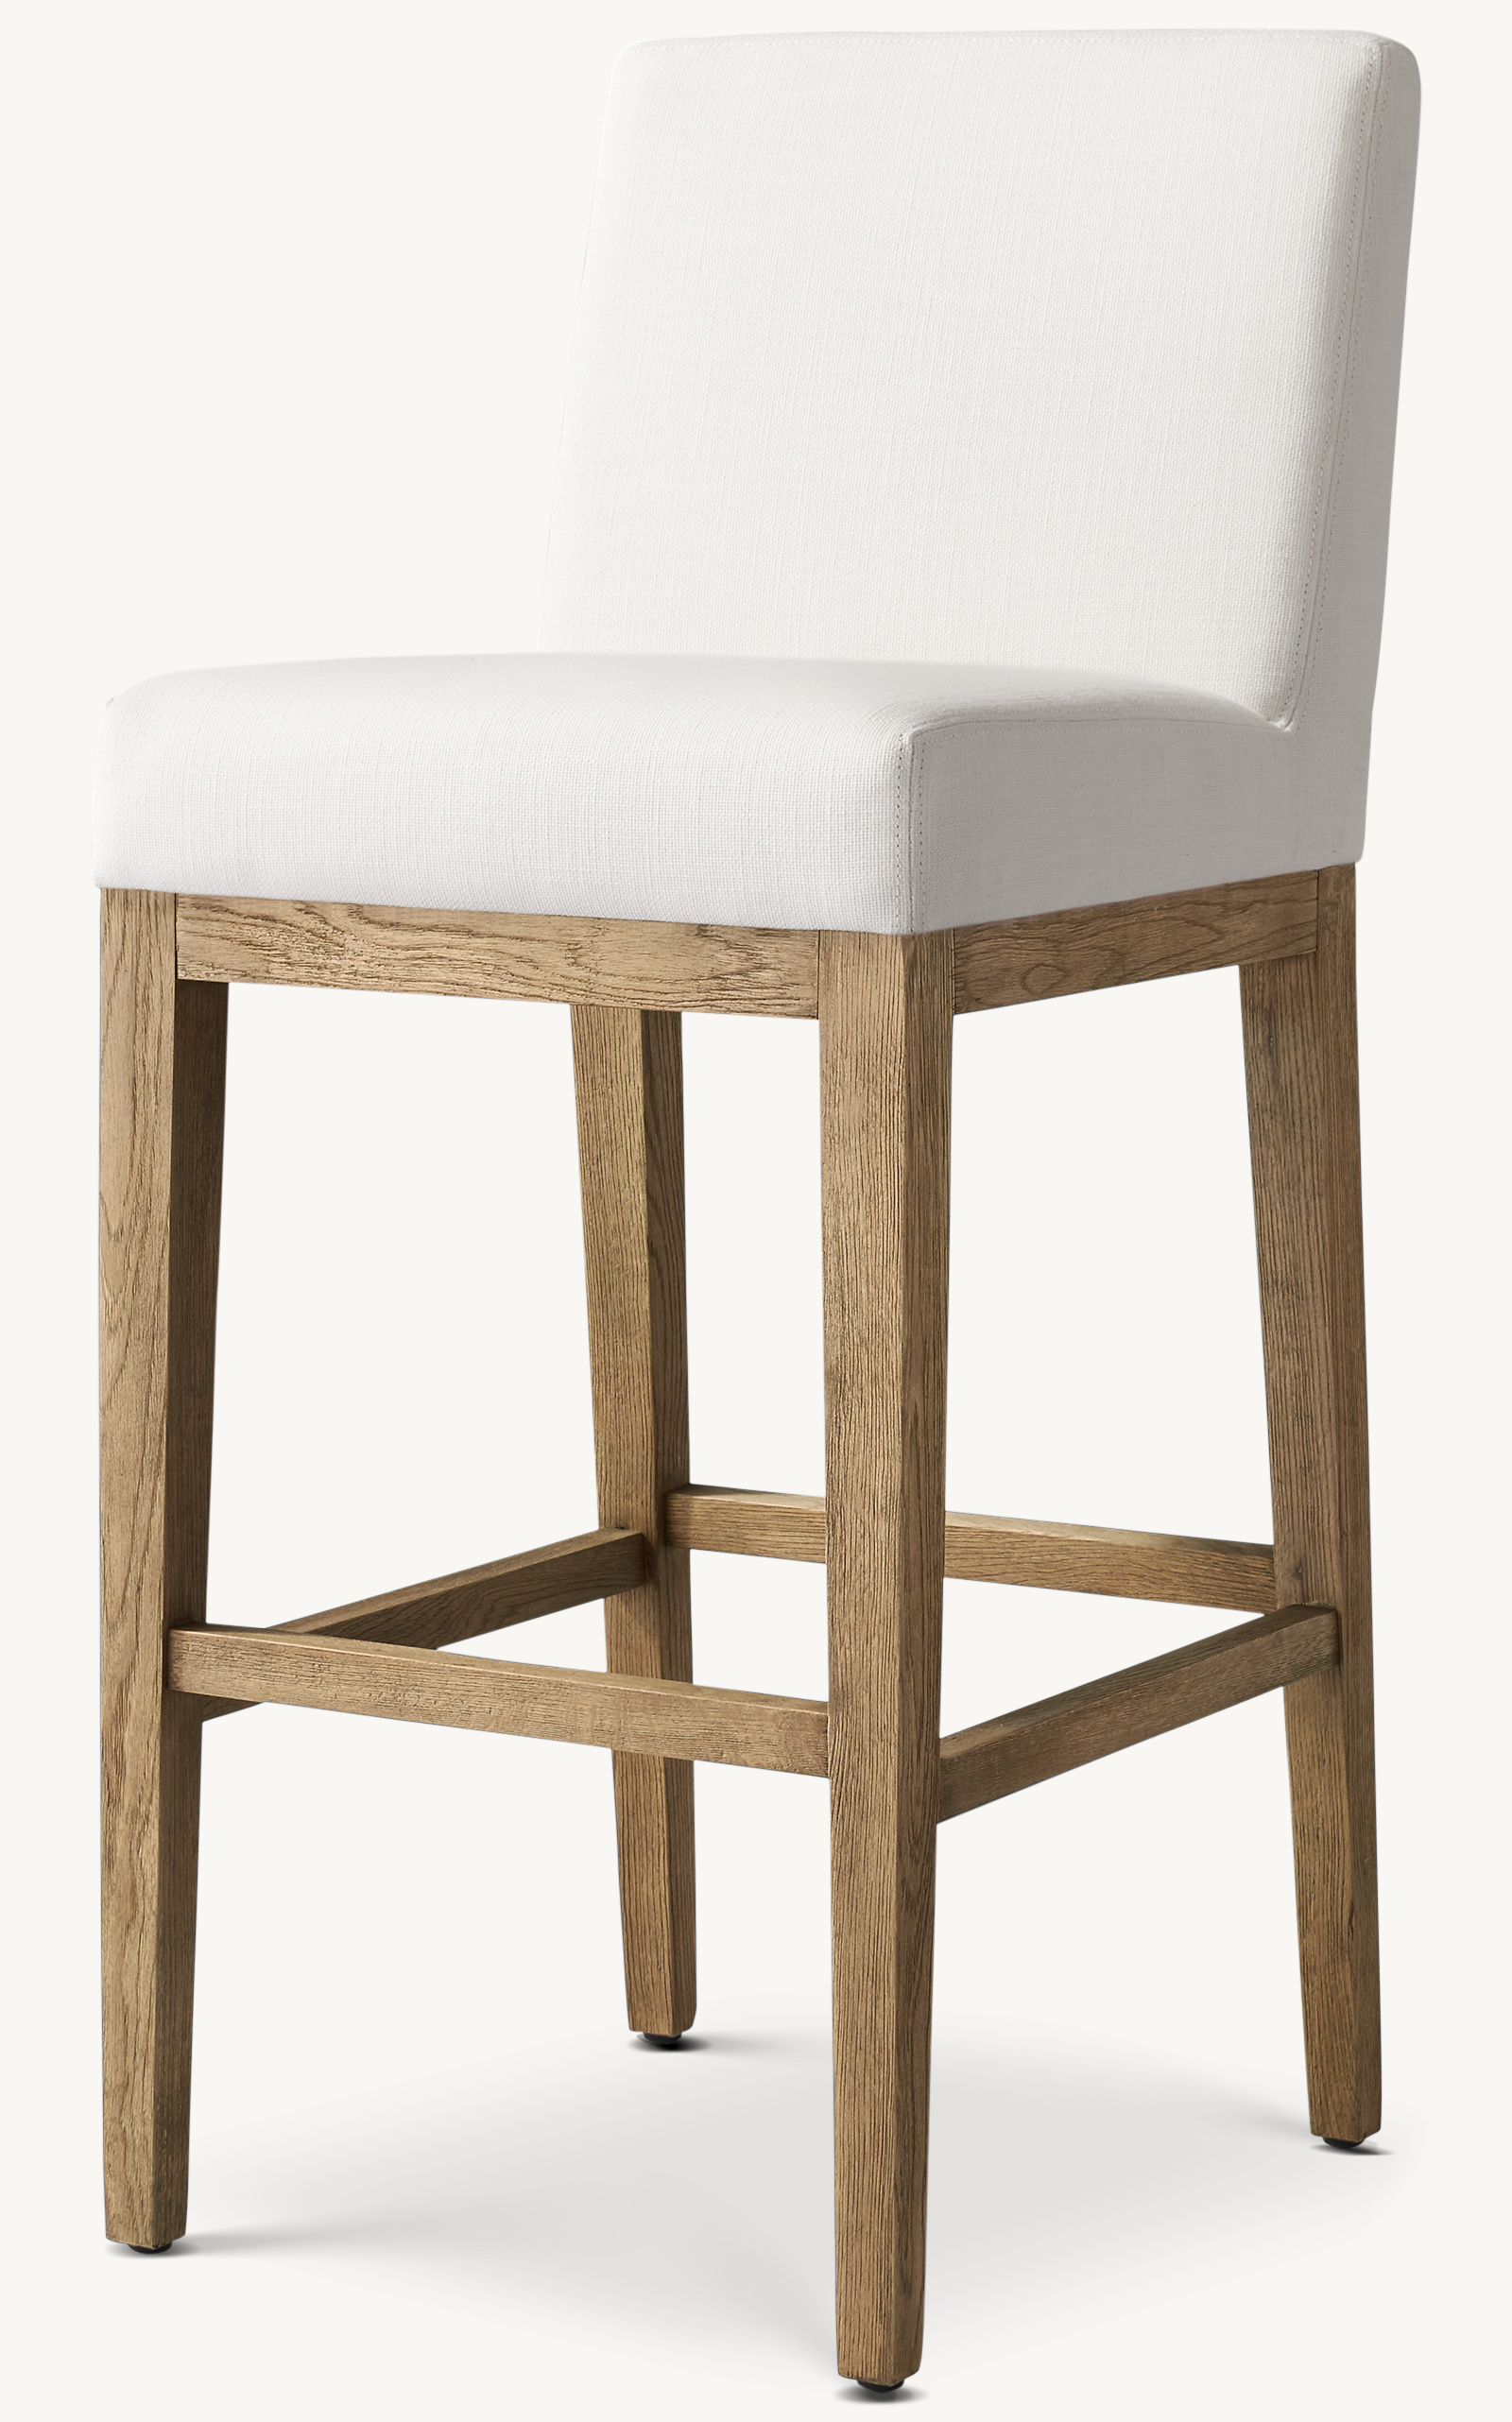 Shown in White Italian Textured Weave with Weathered Oak Drifted finish.